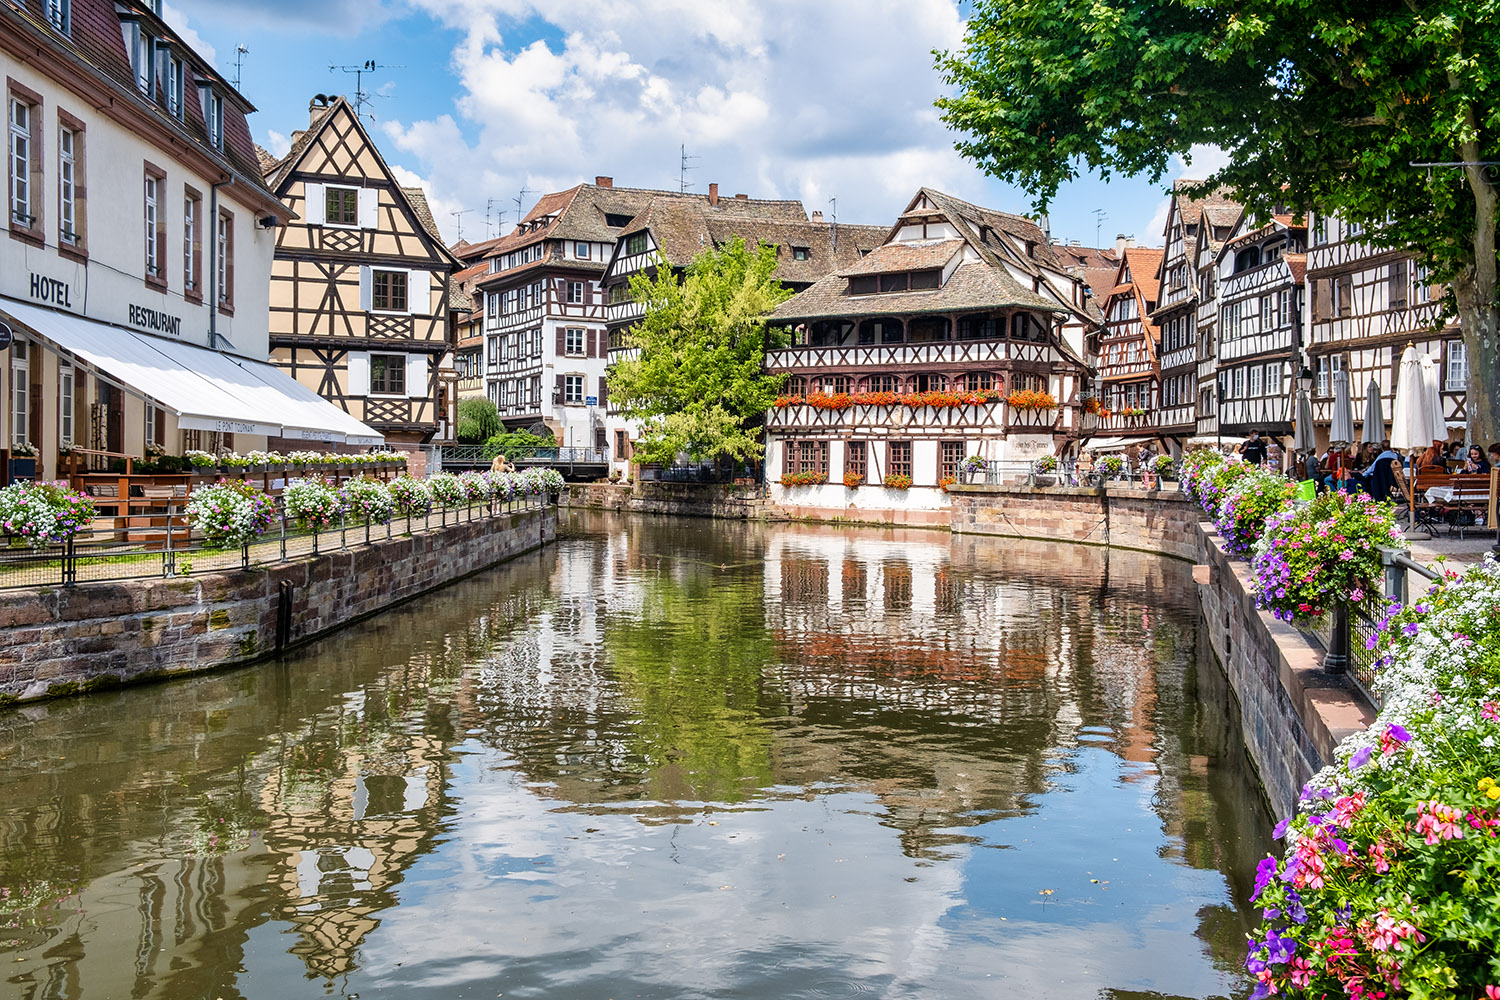 This scene of la 'Petite France' with the 'Maison des Tanneurs' (Tanners' House) is probably the most iconic view of Strasbourg